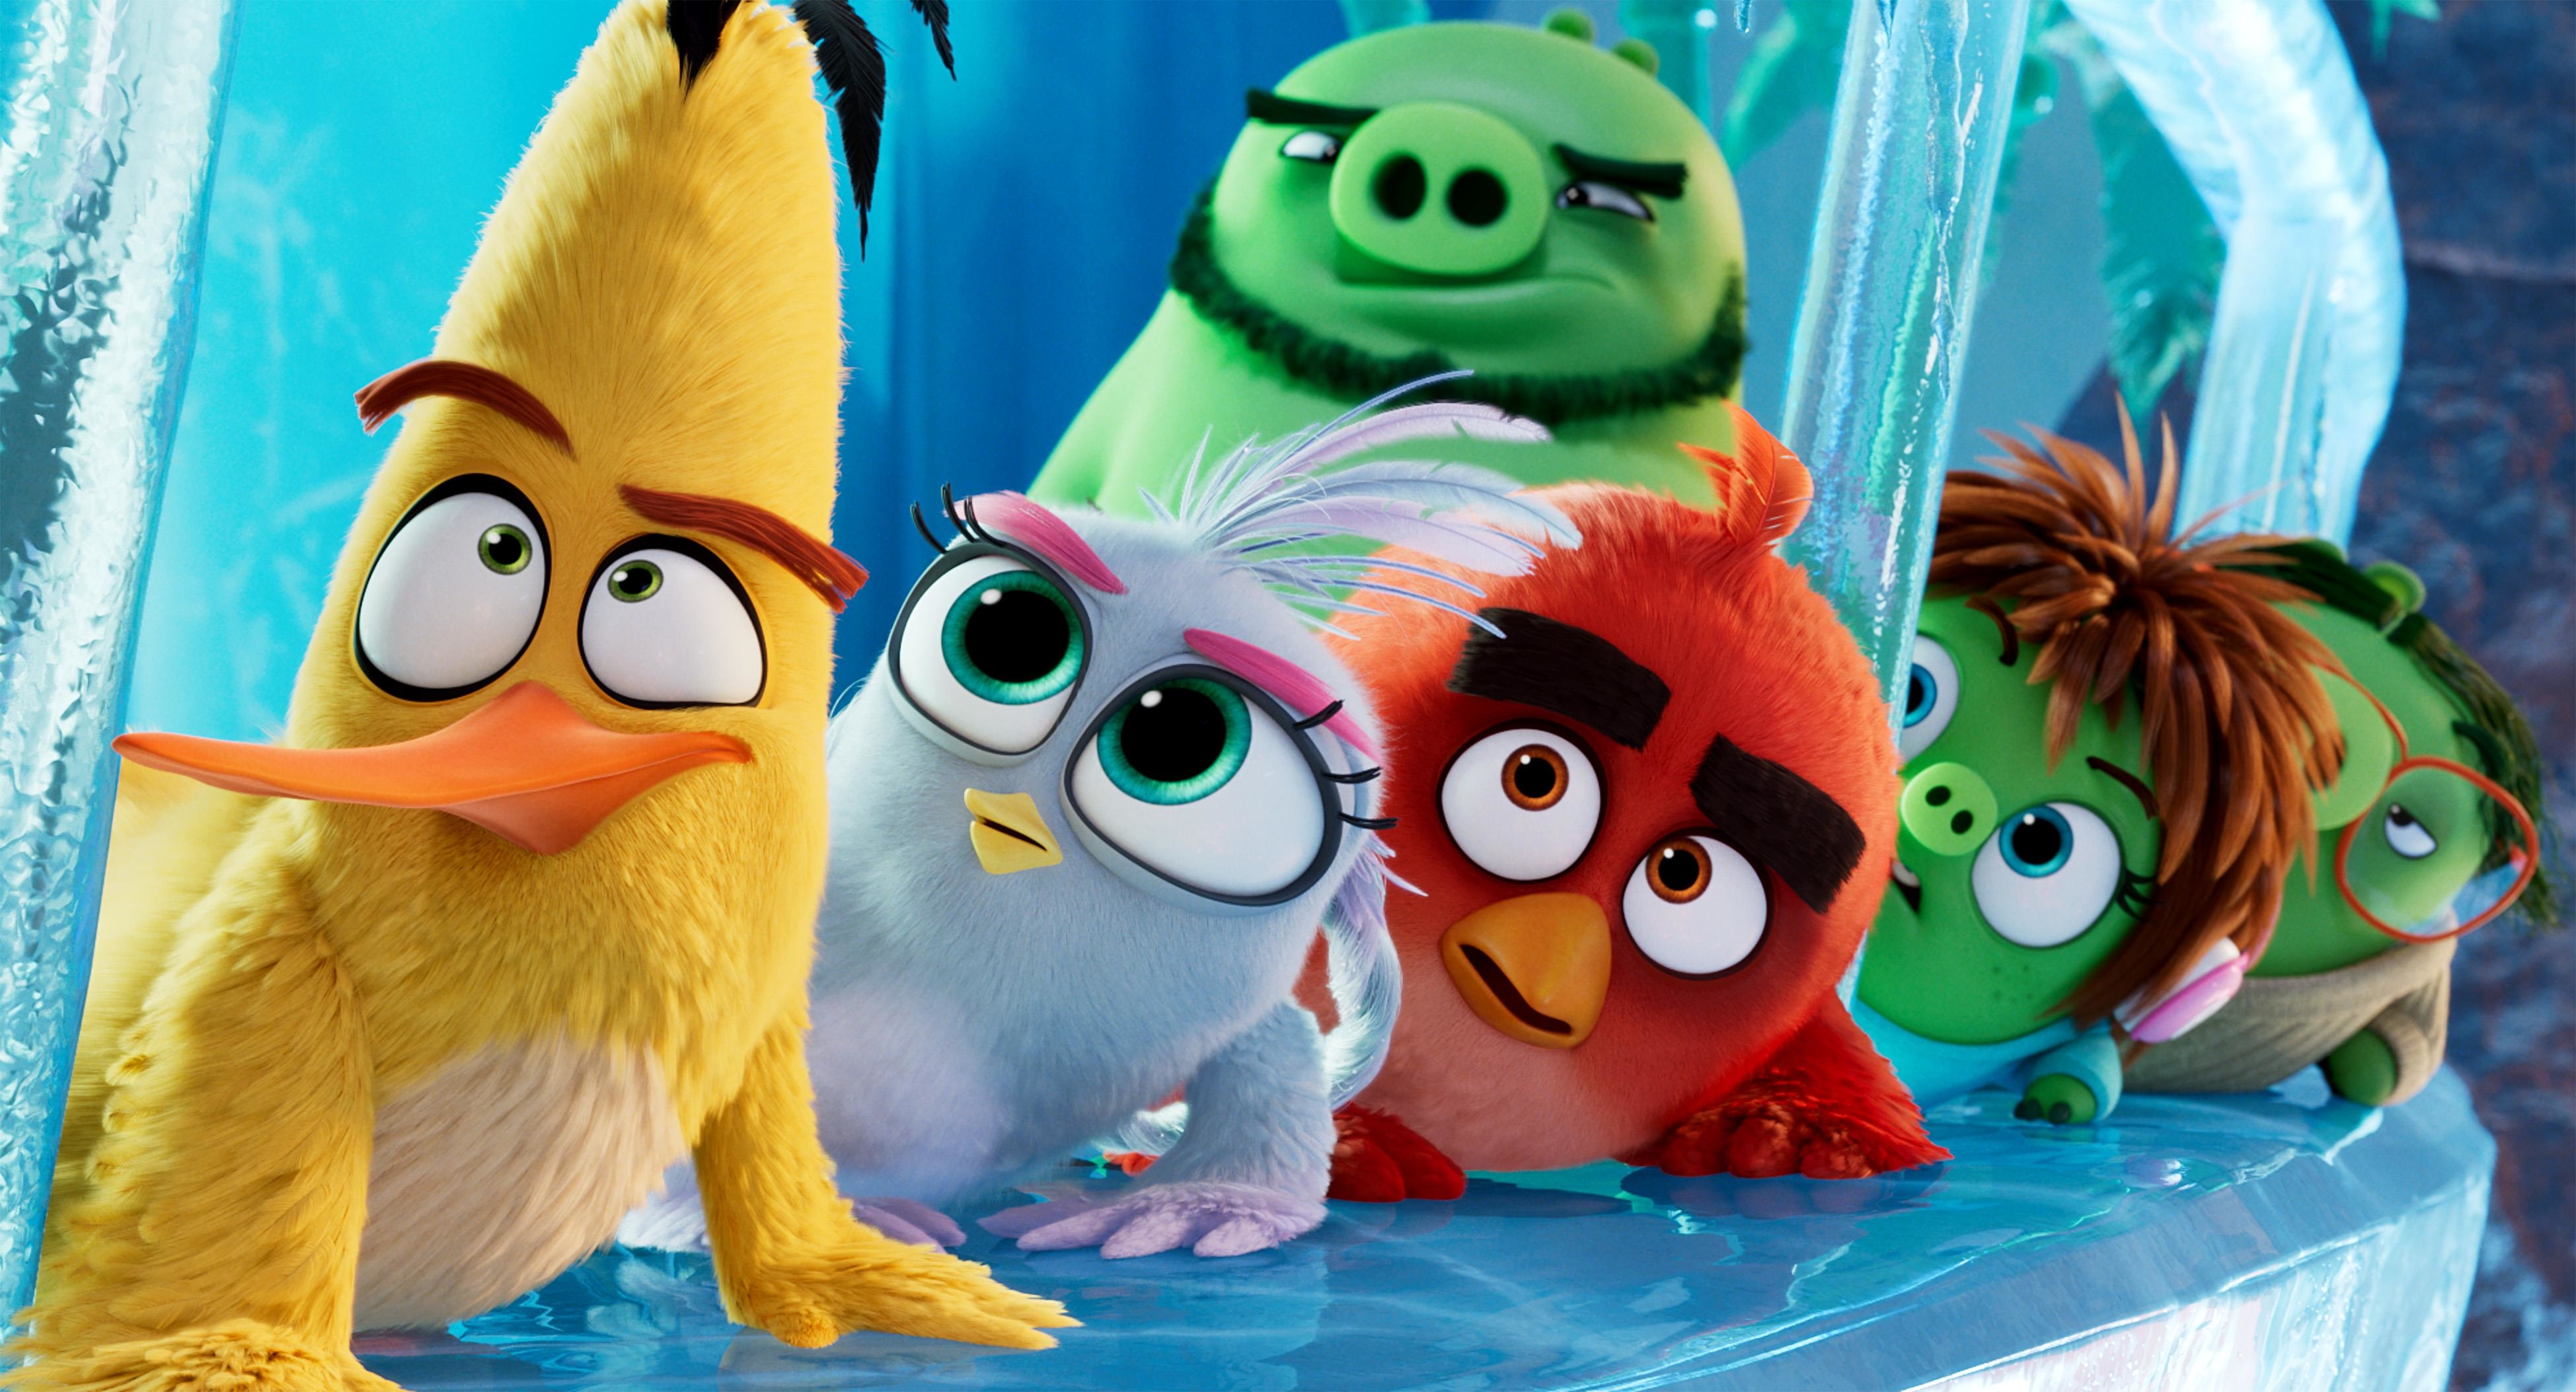 Image du film Angry Birds : copains comme cochons afdf846d-5dee-48ad-8918-fdc1c2a2996a